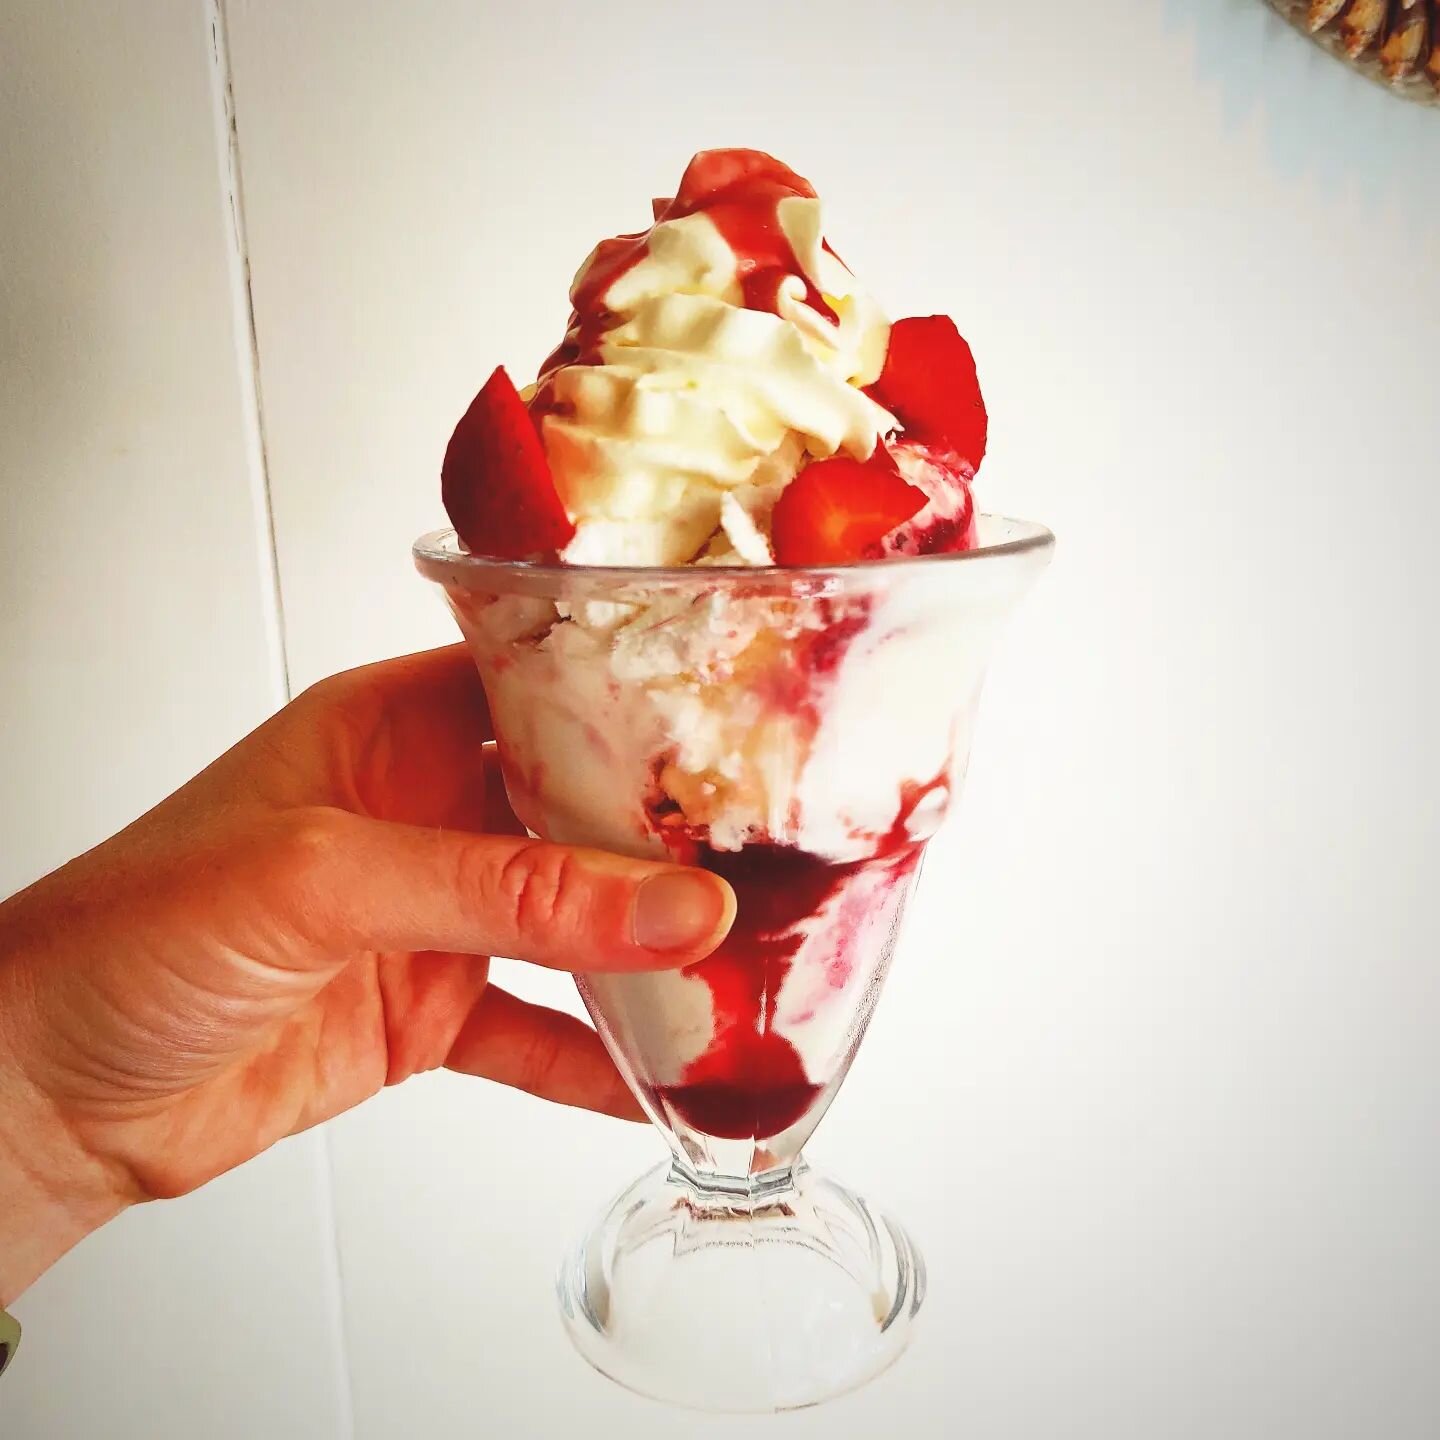 A boss ice cream sundae goes down a treat on a hot summer day 😍 it's the last weekend to grab one of our Eton Mess sundaes 👀

Boysenberry ripple ice cream, meringue, raspberry syrup, custard, whipped cream, and fresh strawberries.

Come and get it!